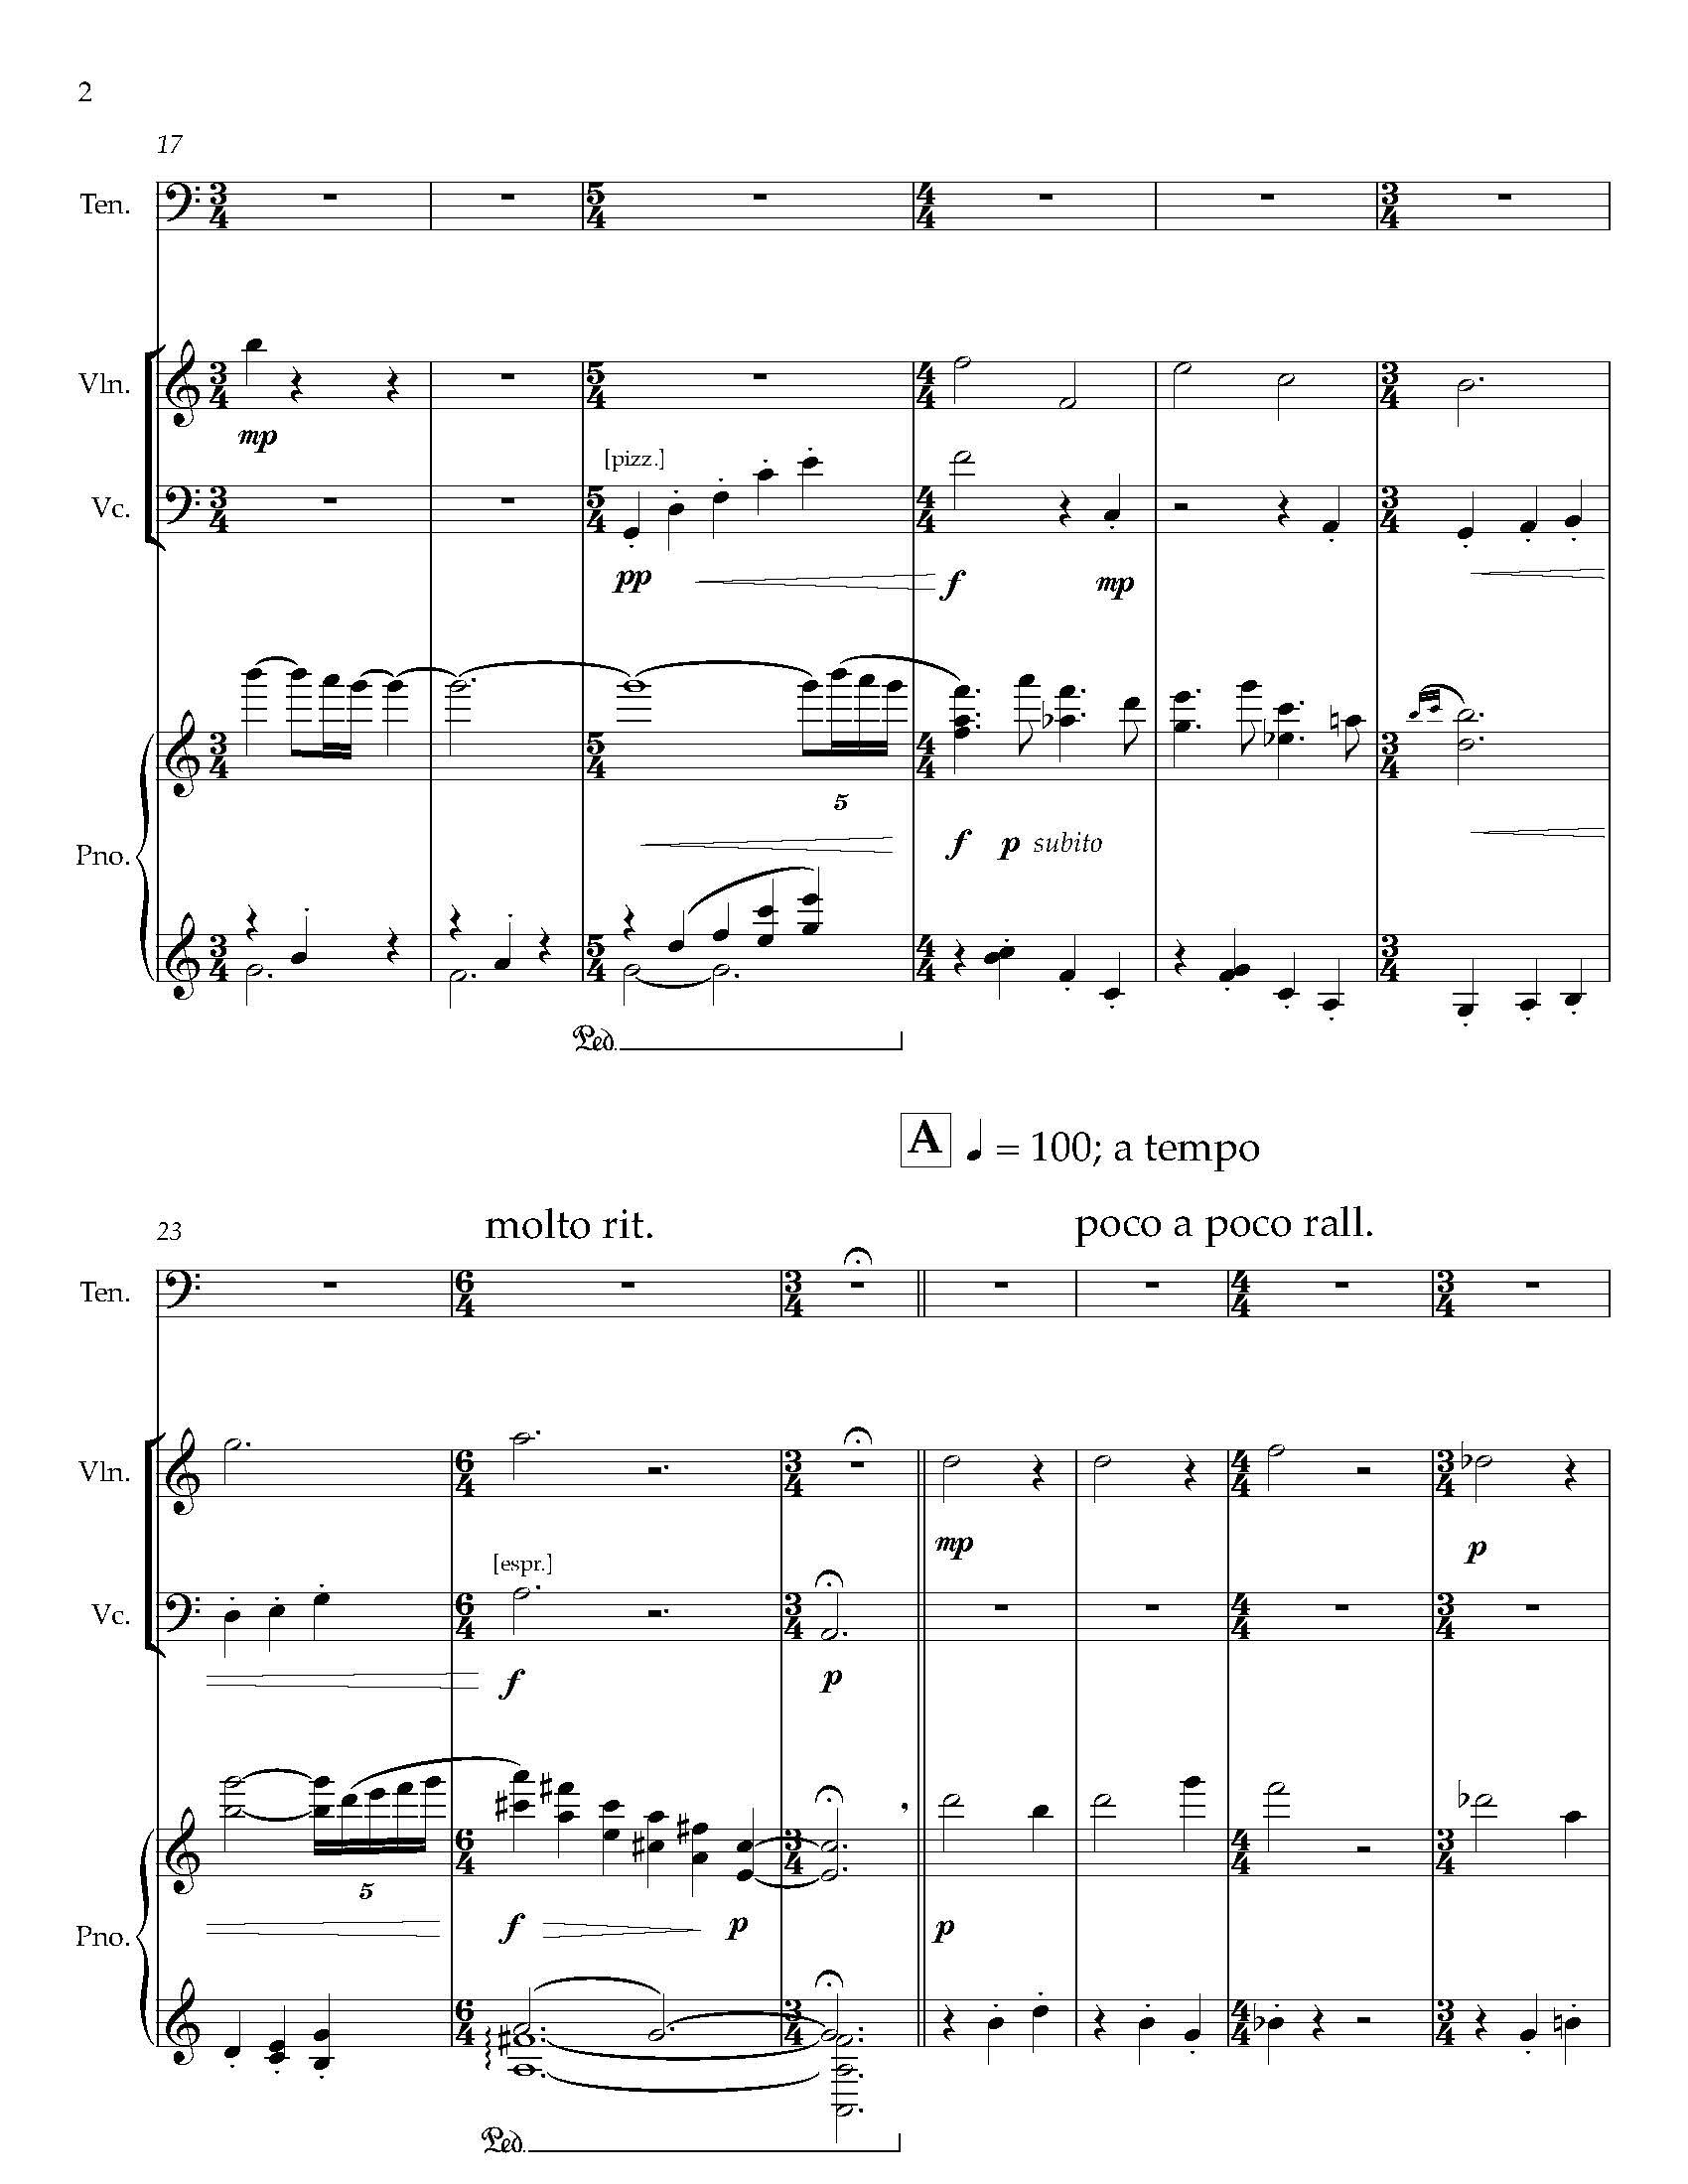 Gursky Songs - Complete Score_Page_10.jpg